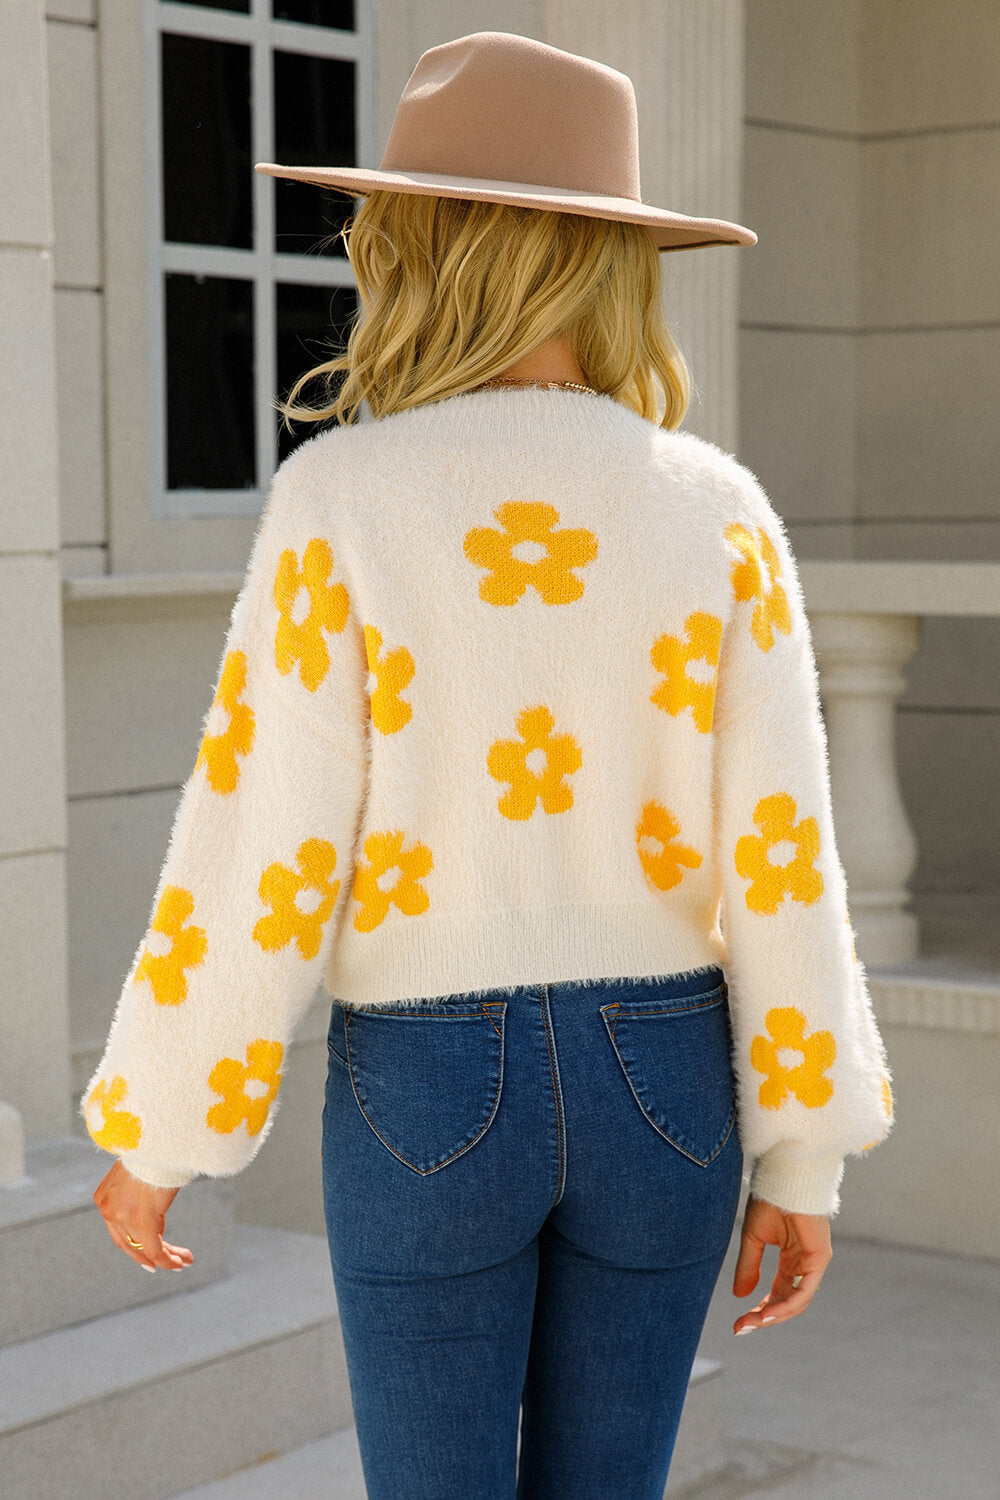 LADIES--SWEATER—Floral Open Front Fuzzy Cardigan—  Make your own statement